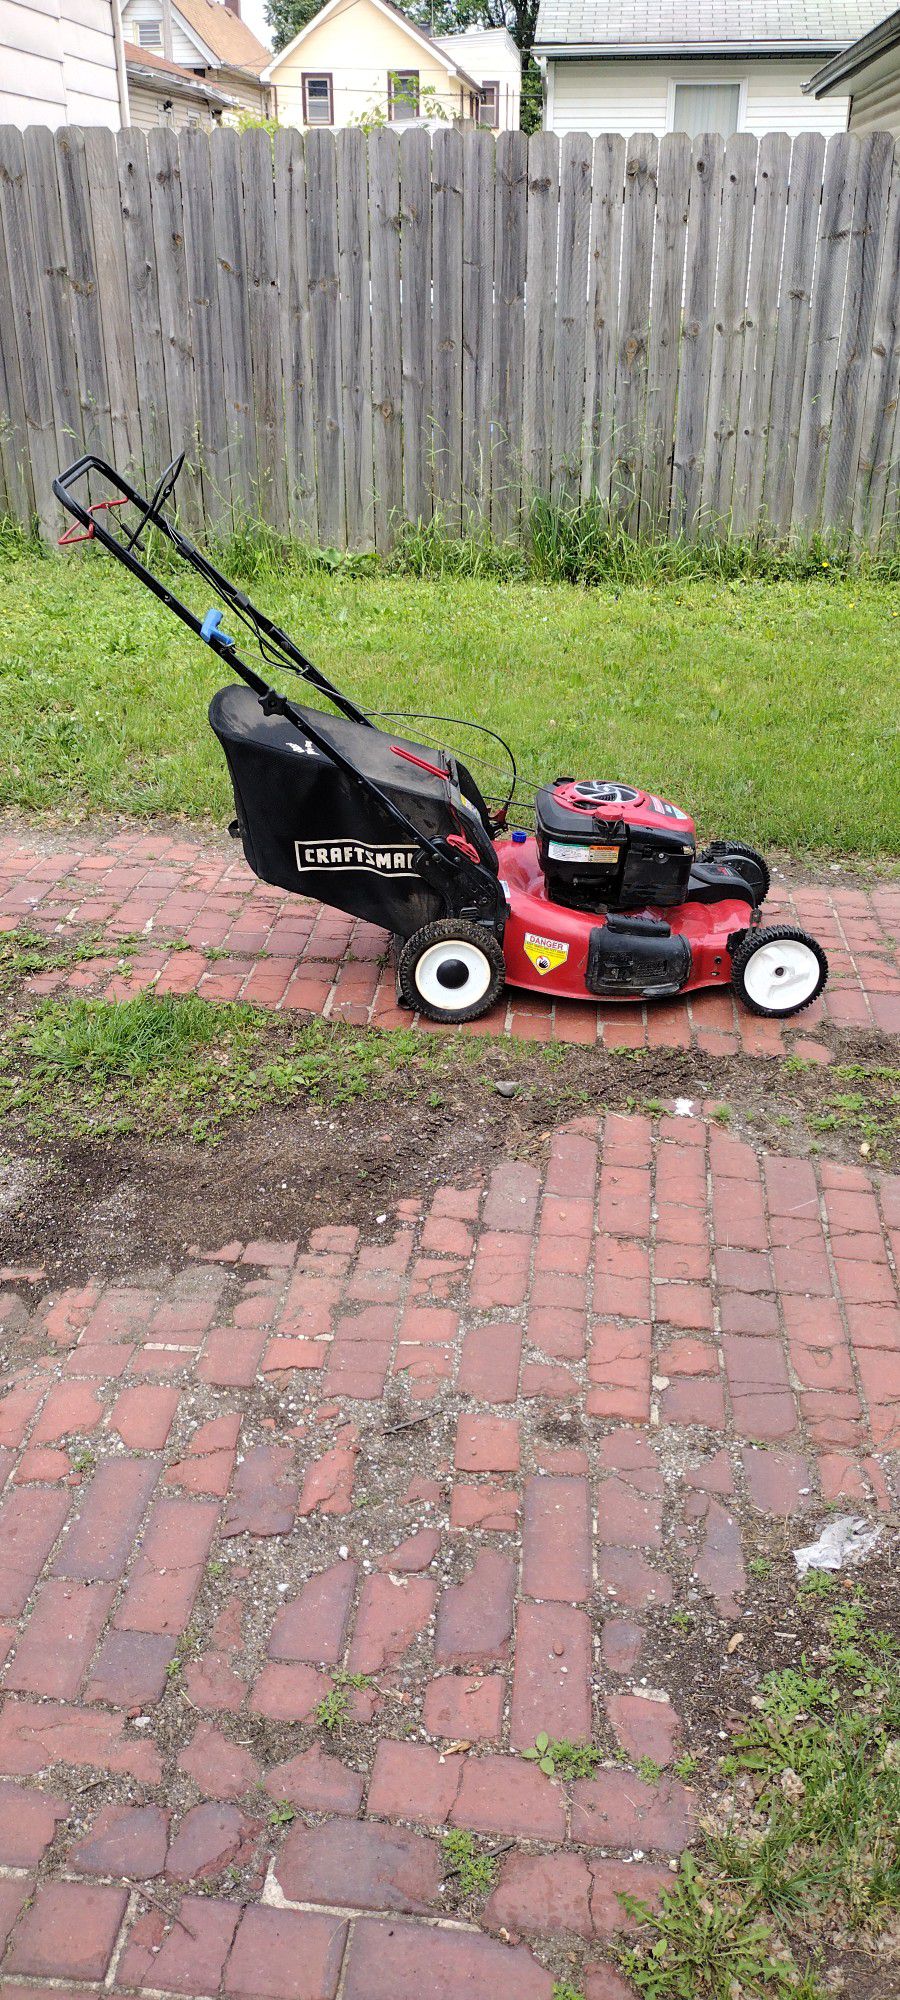 Craftsman 6.75 HP Easy Start Self-propelled Lawn Mower With Bag